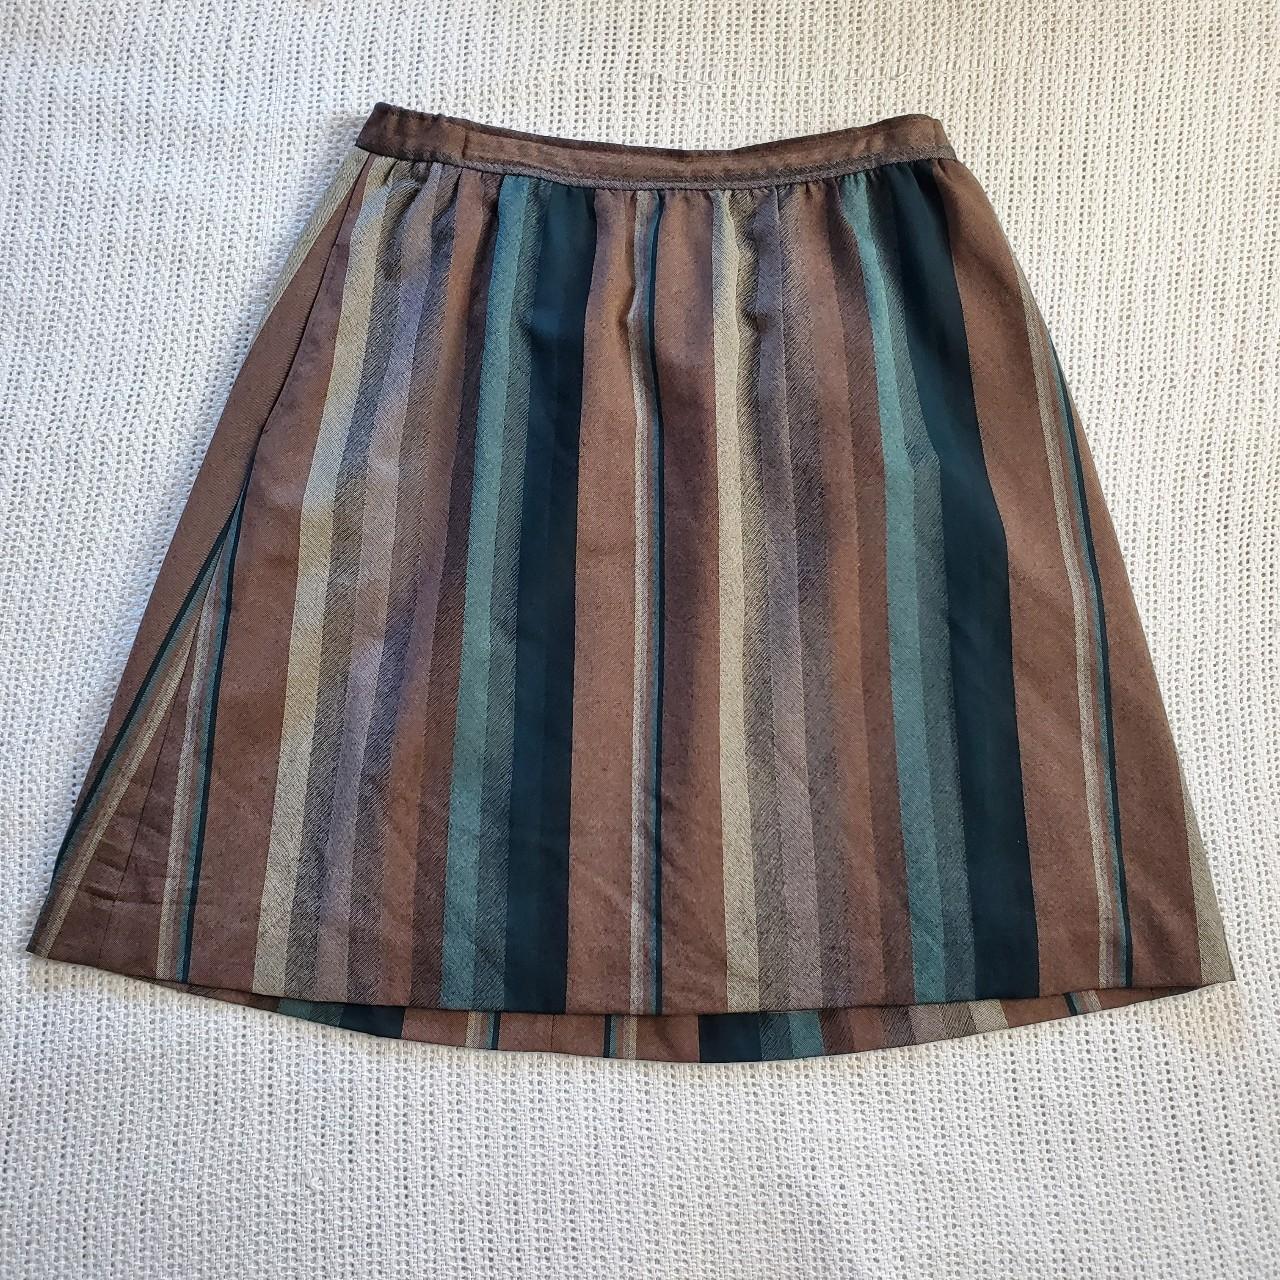 Evan Picone Women's Brown and Green Skirt